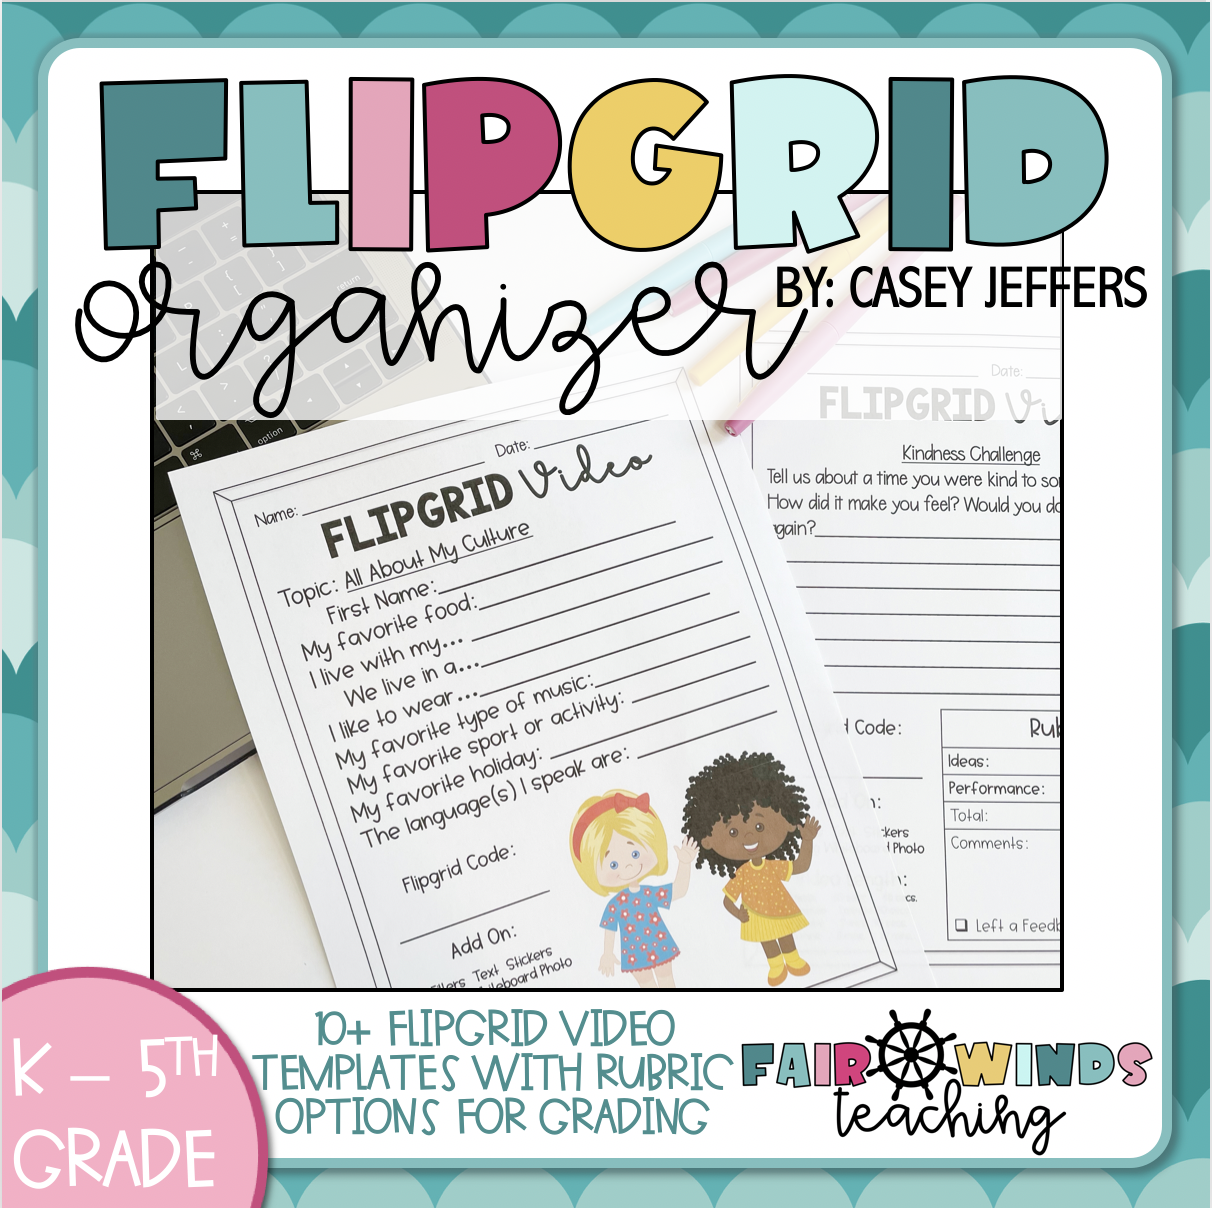 "I really like the differentiation provided between the different flipgrid activities. The rubrics embedded within the worksheets is super convenient and helpful. Nice product!" - Kassondra Sosa